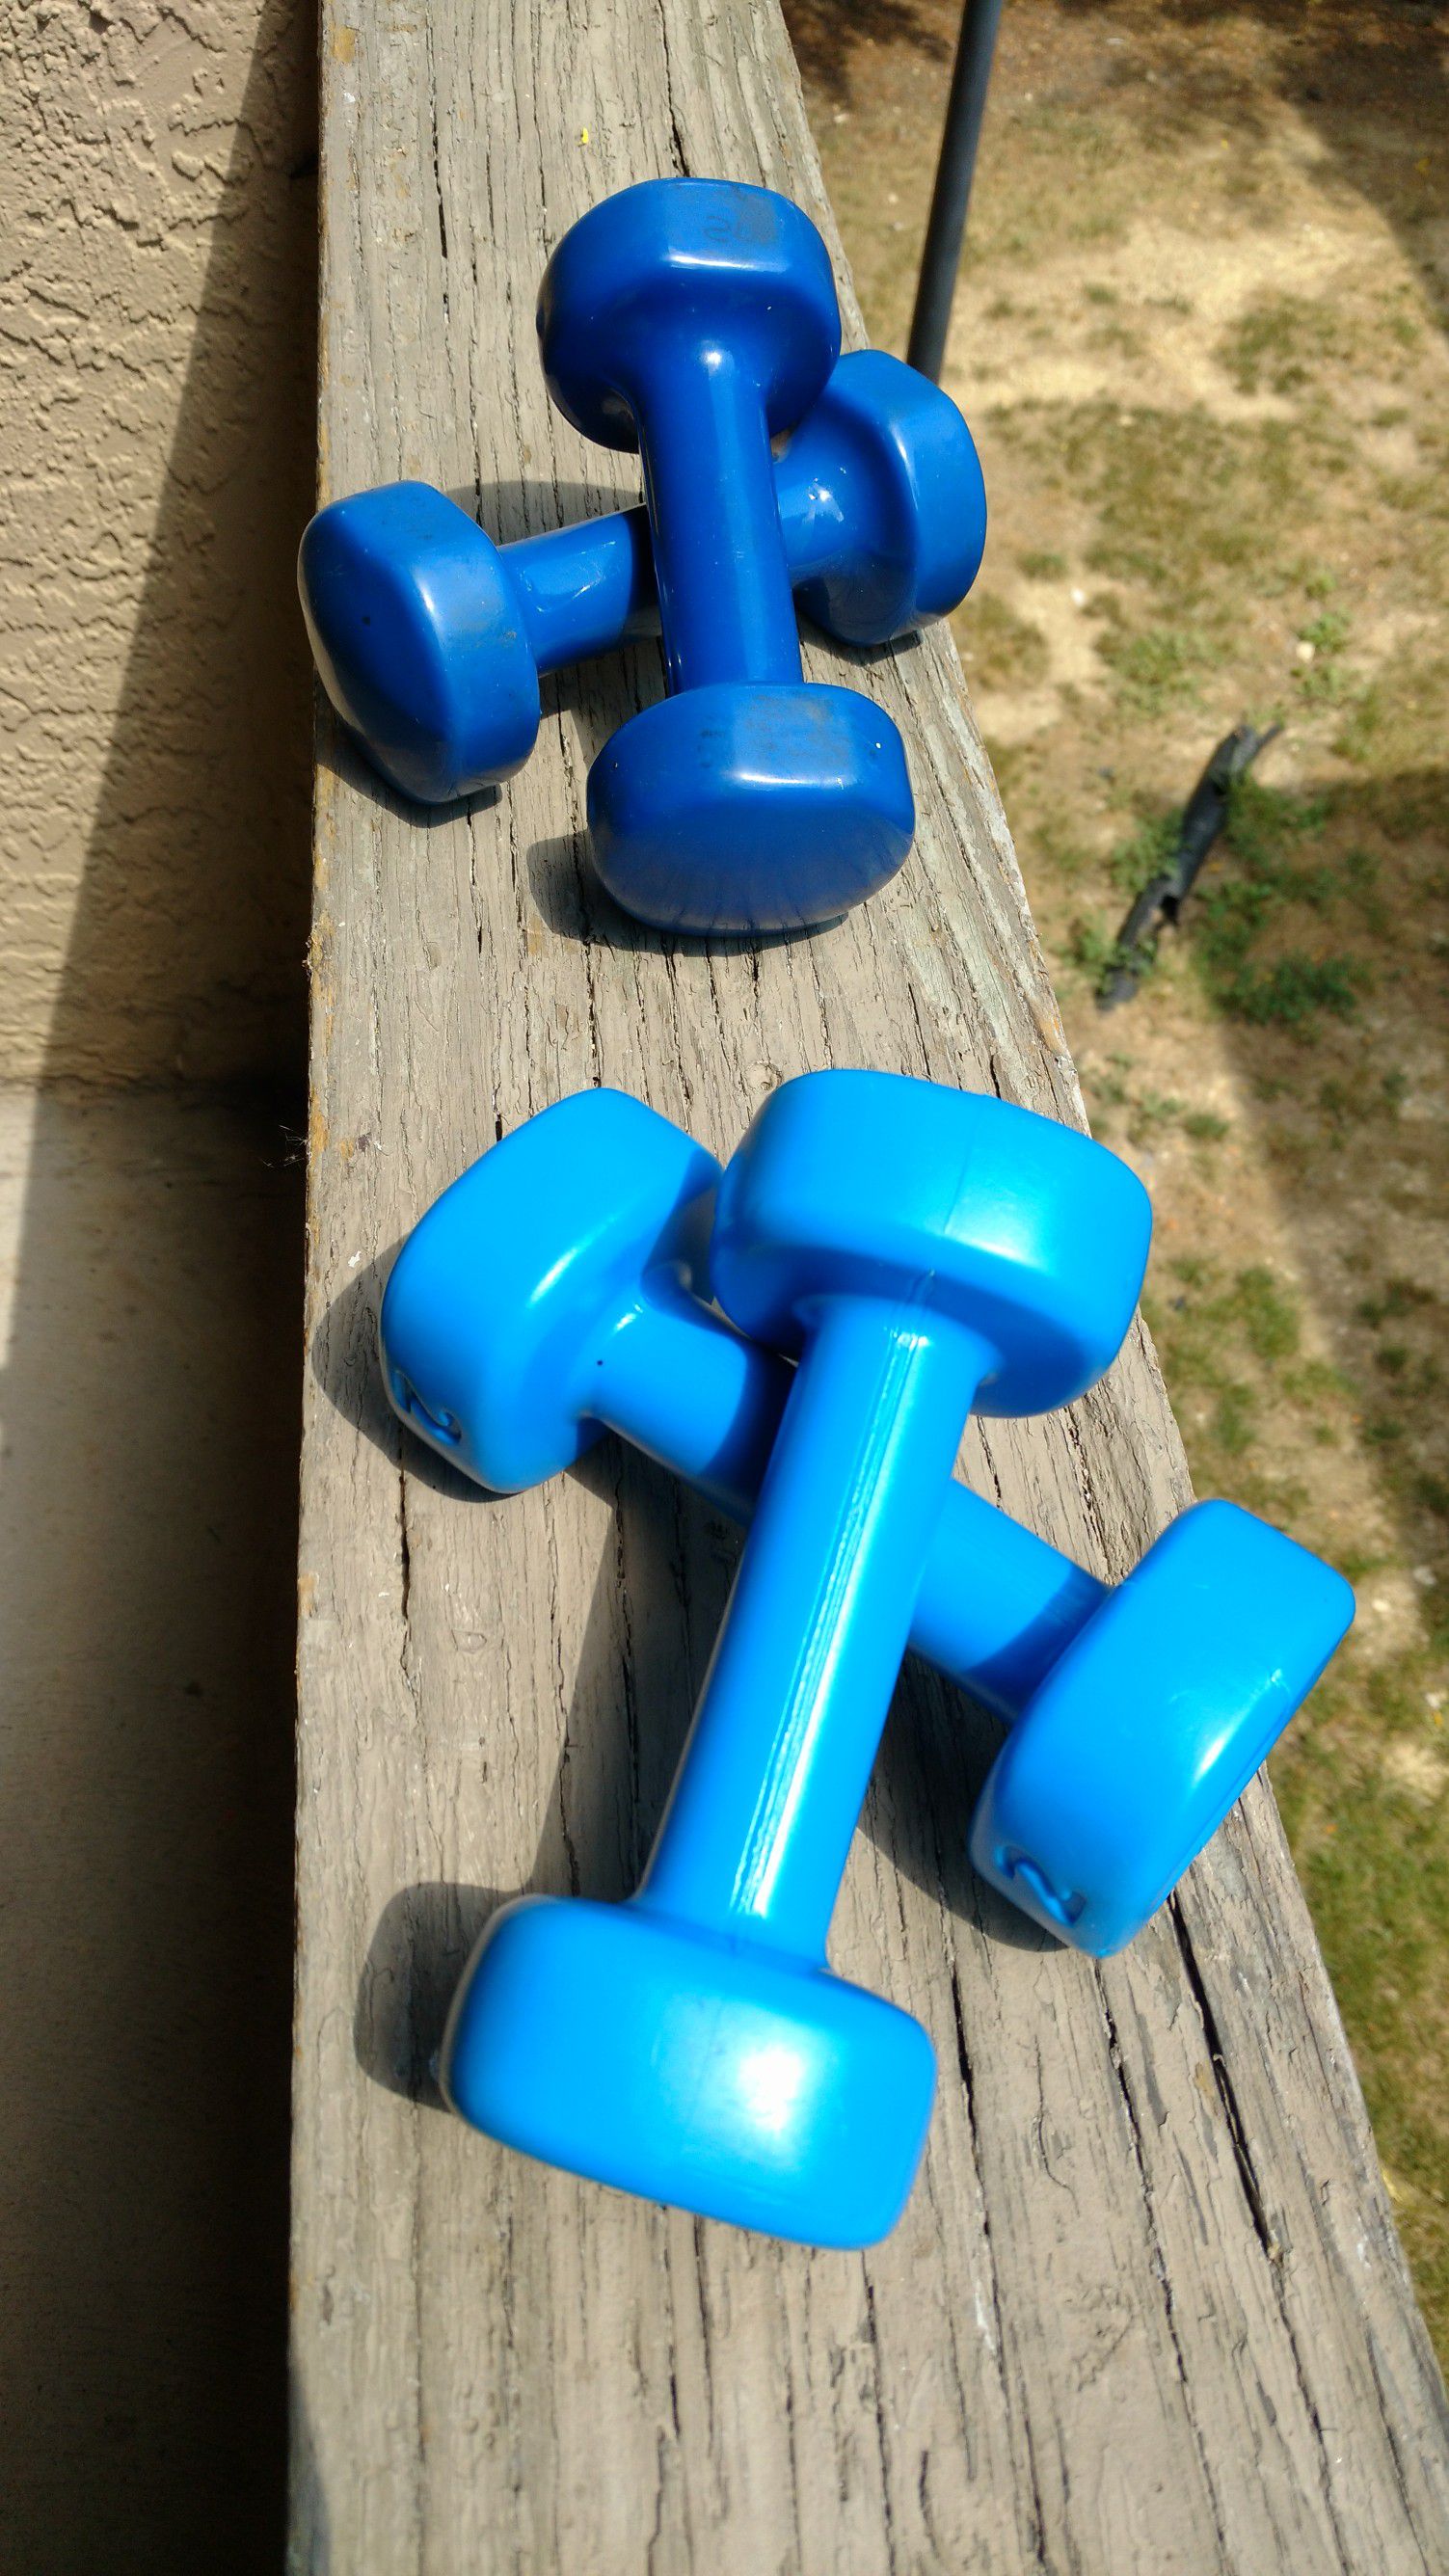 Set of four blue dumbbells 5 pounds and 2 lb Price Reduced